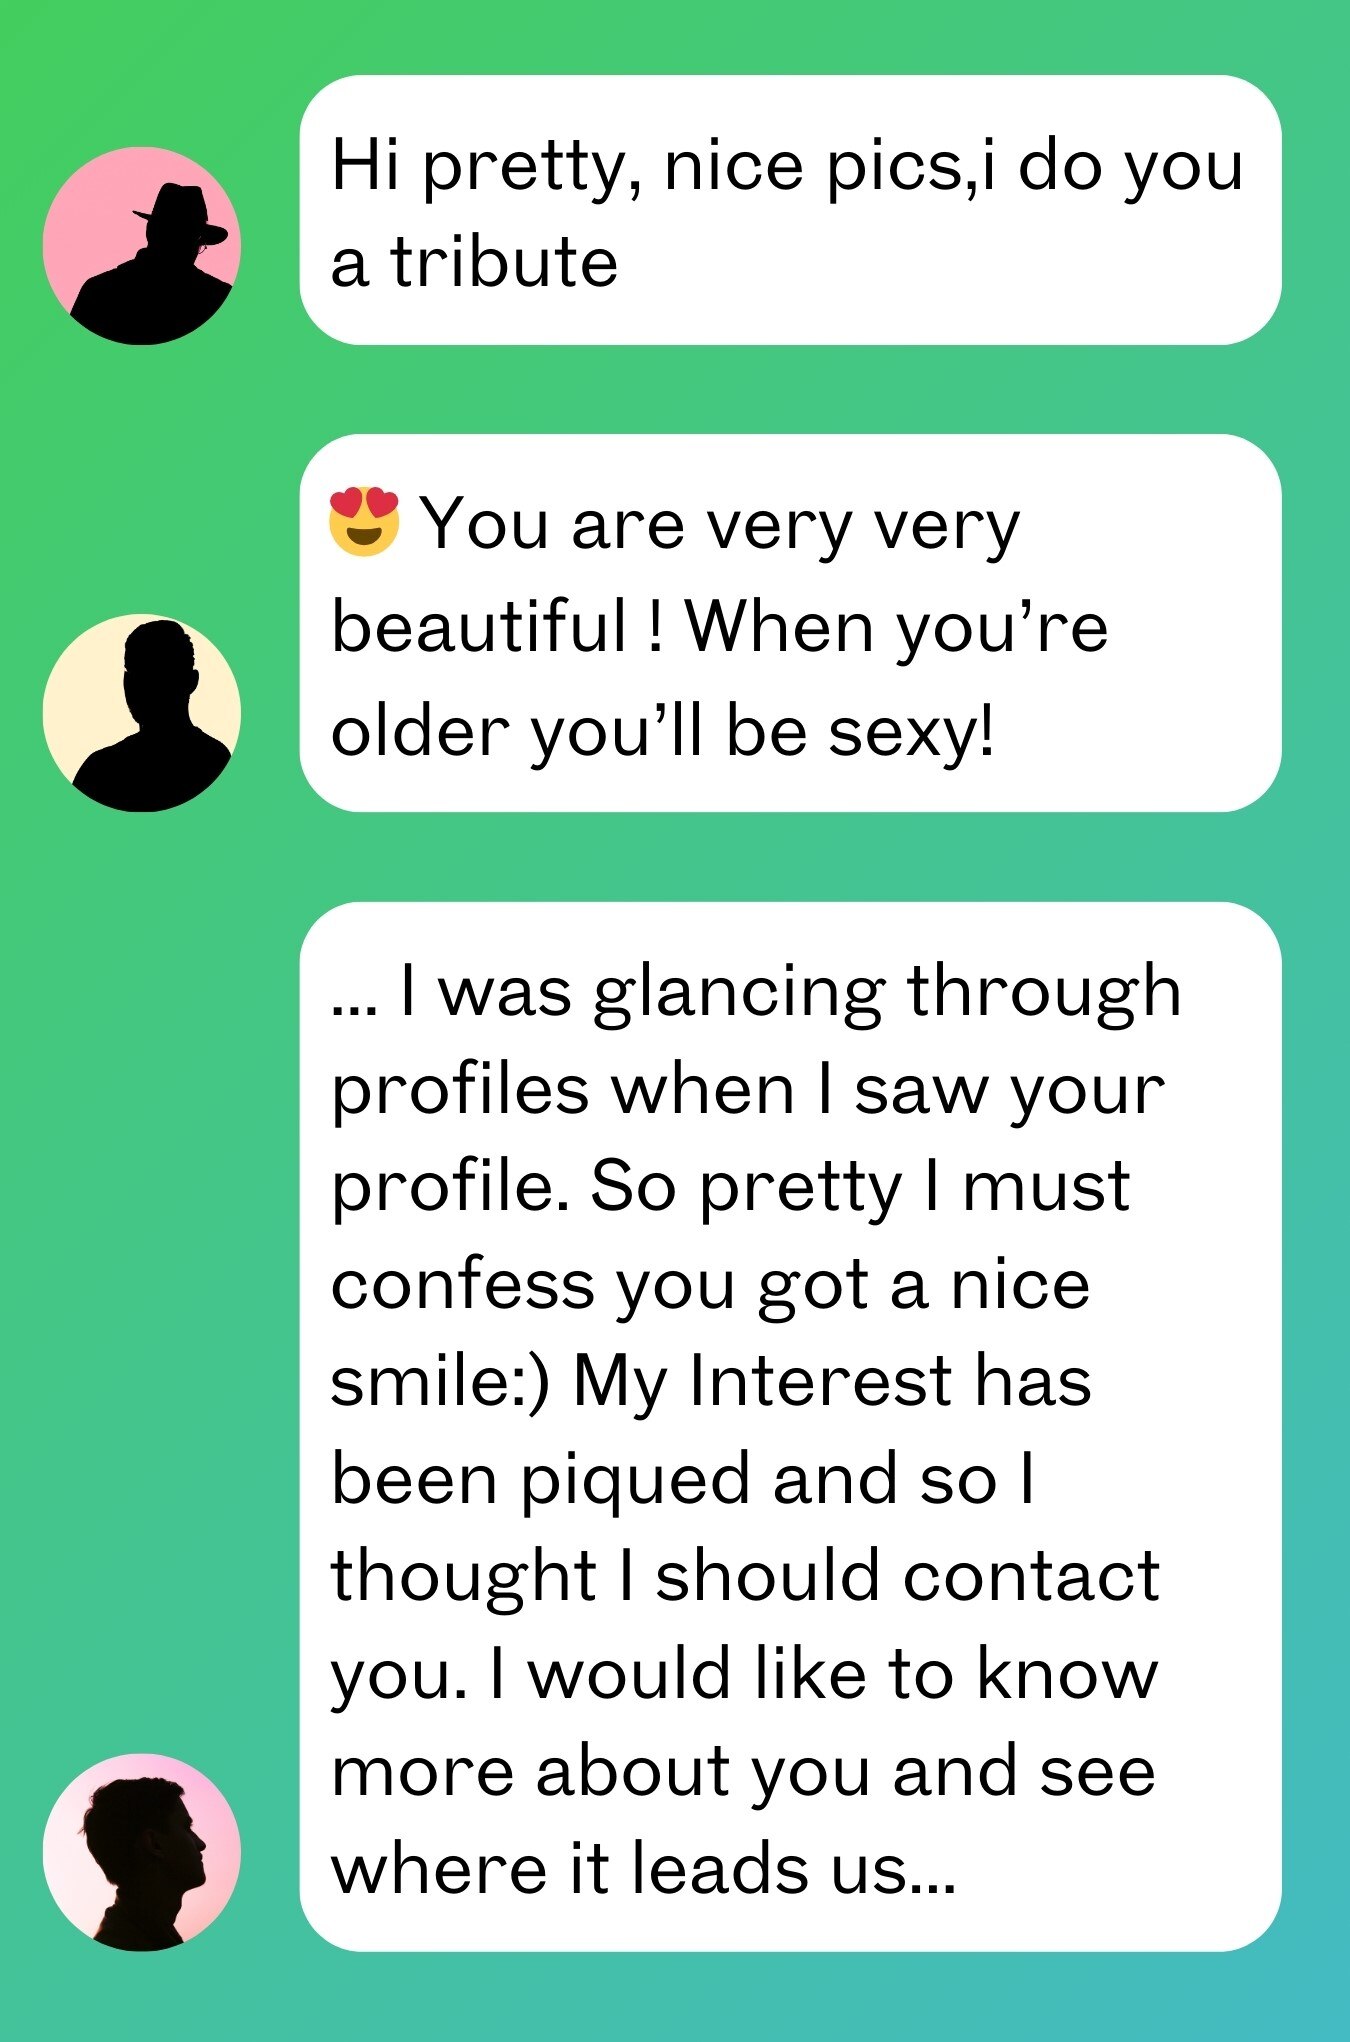 A selection of DMs calling someon "sexy", "so pretty" and saying "I do a tribute".